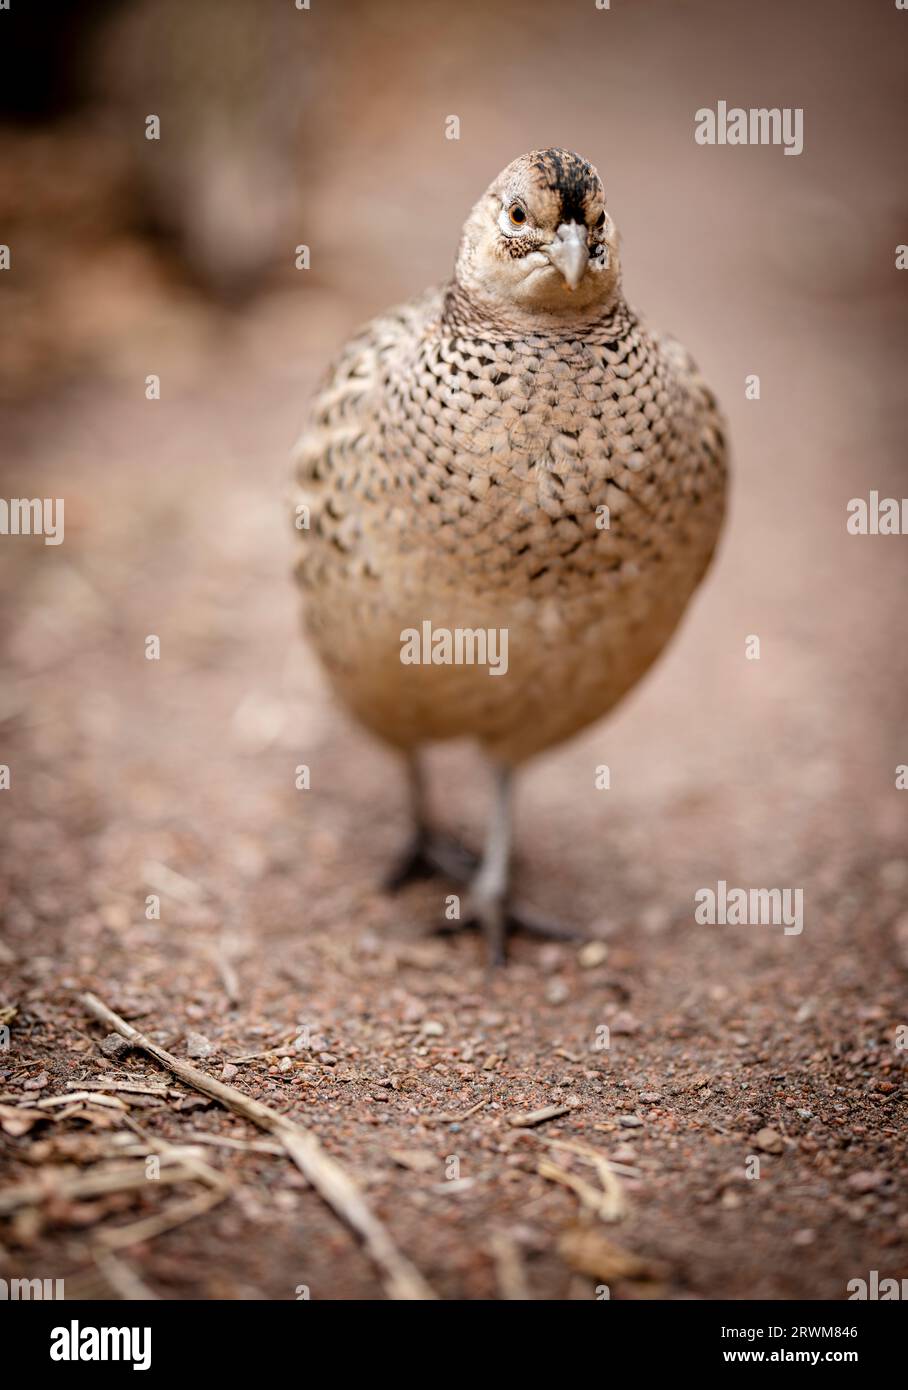 a pheasant is captured from the front view as it gracefully traverses a gravel pathway. The intricate details of the pheasant's feathers and features Stock Photo